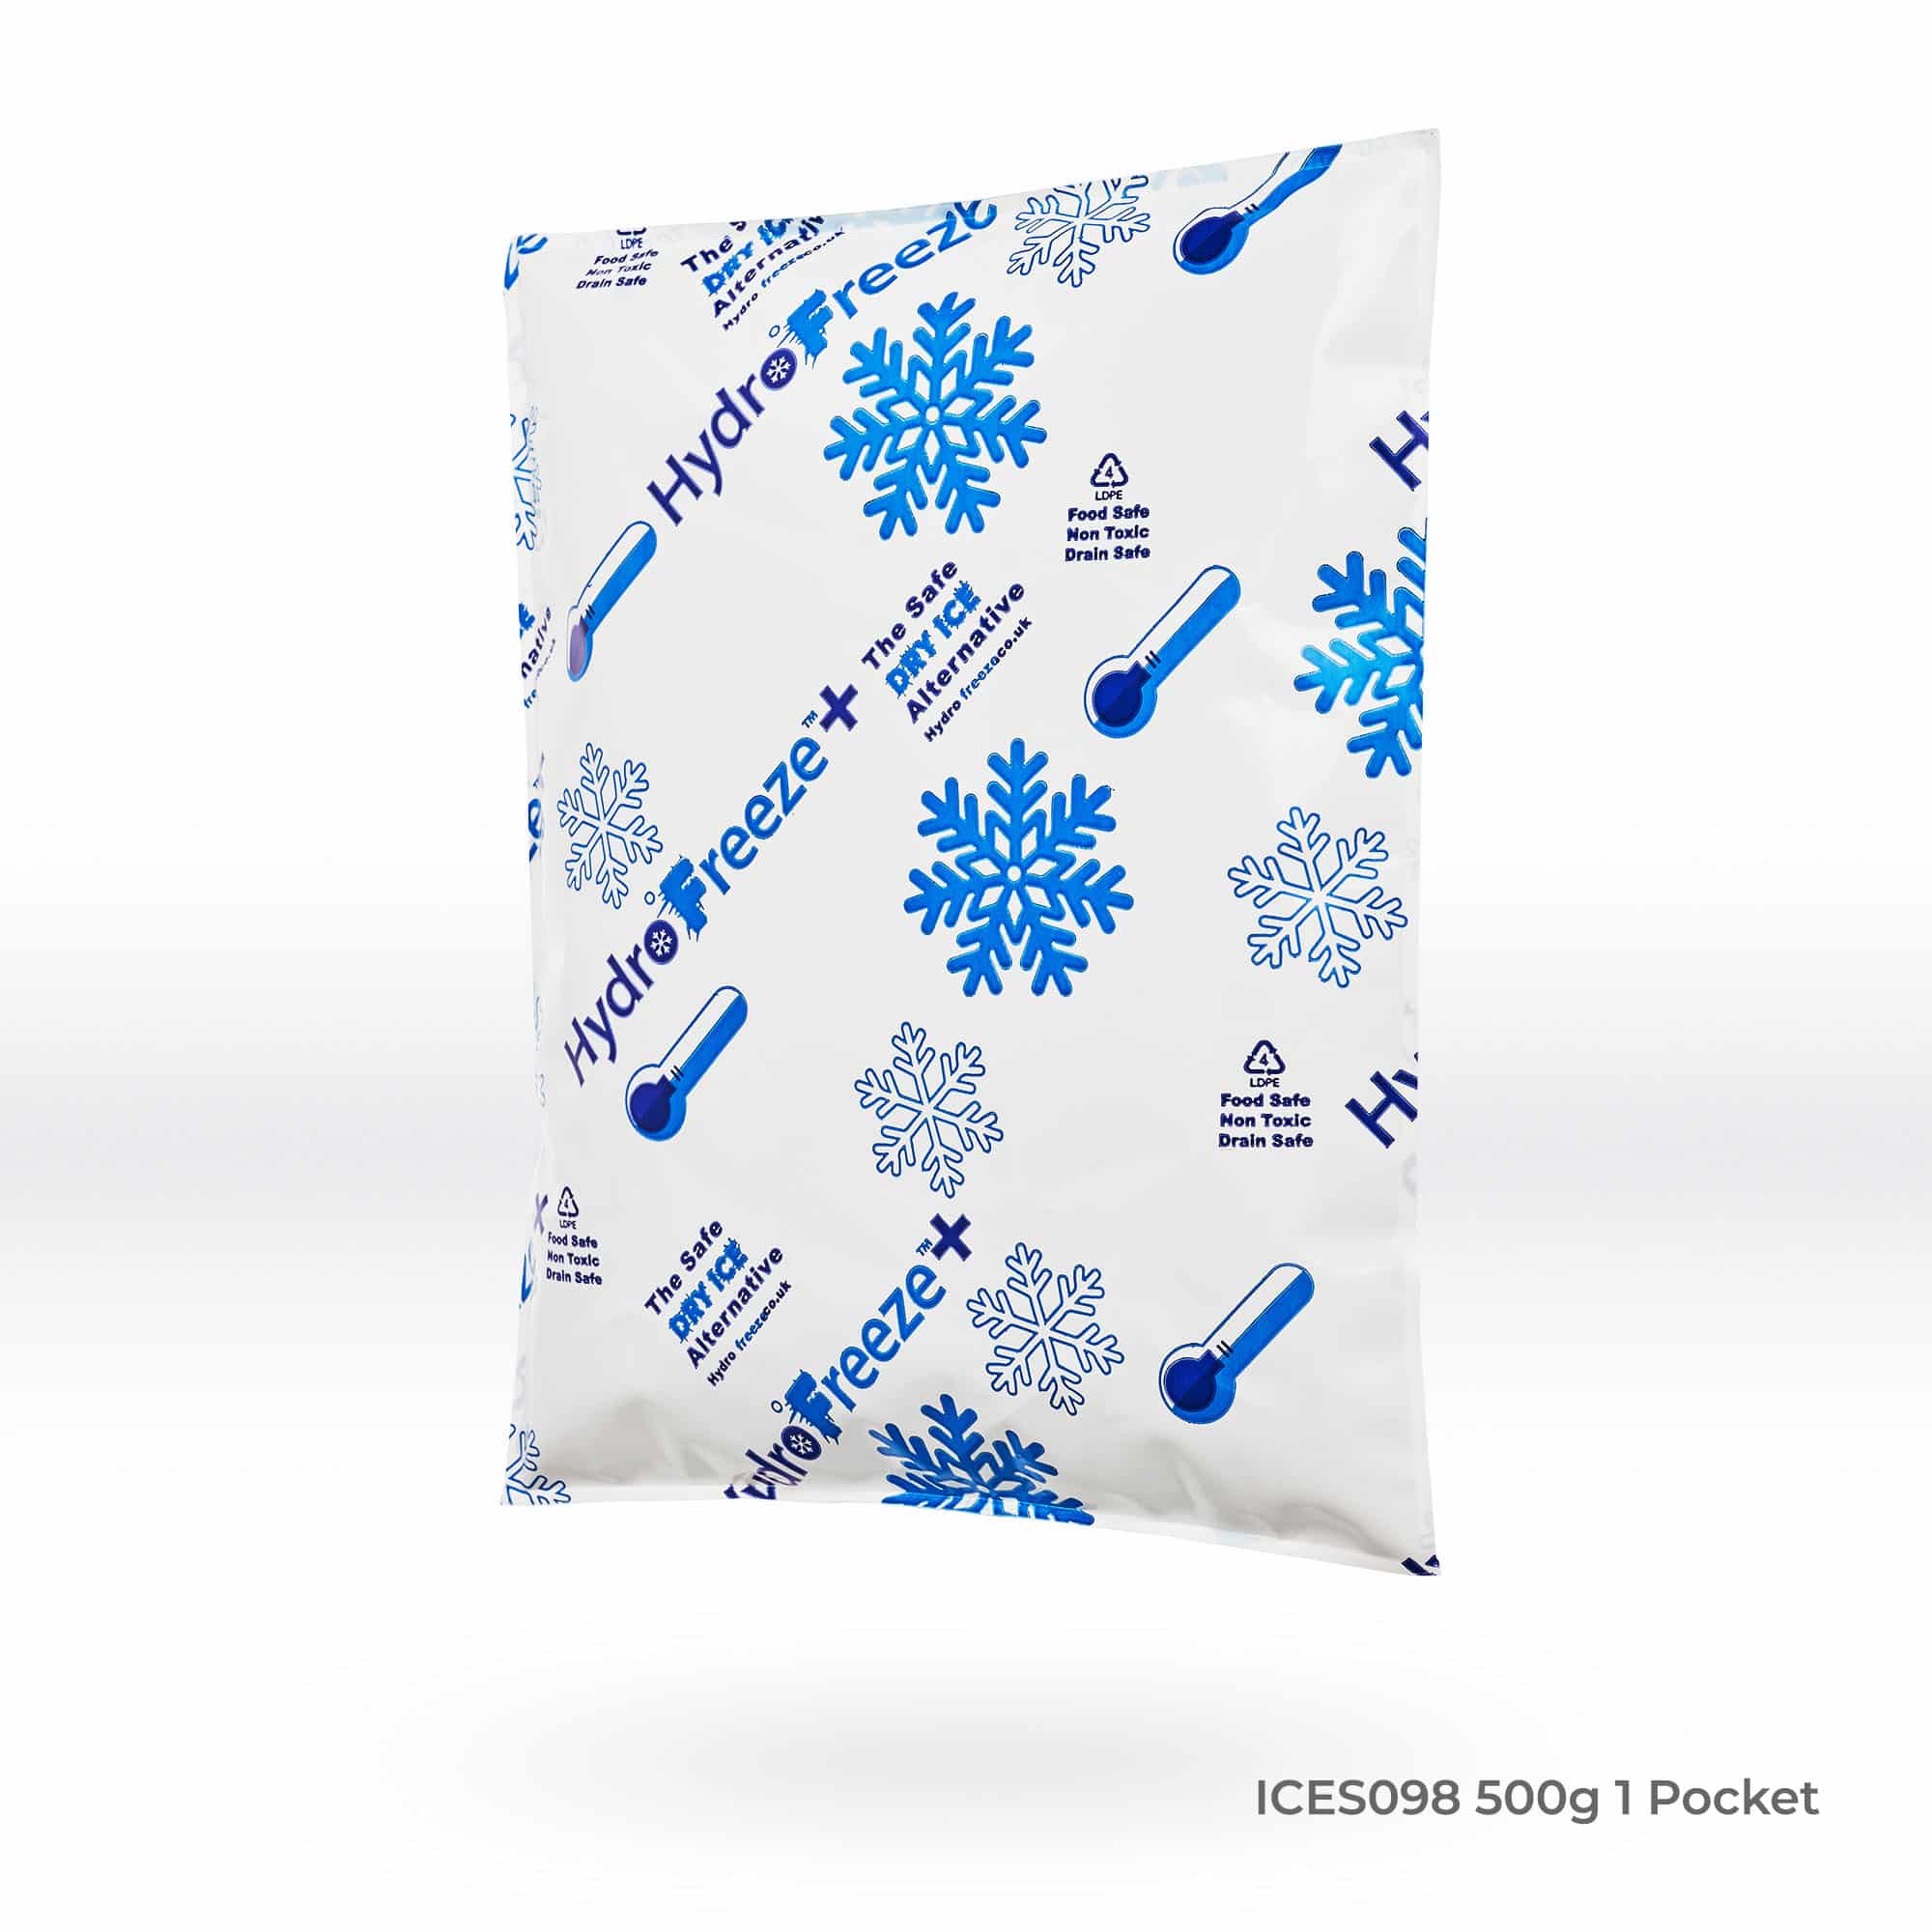 ICES098-HydroFreeze-500g-1-Pocket-Square-LR-with-Text.jpg